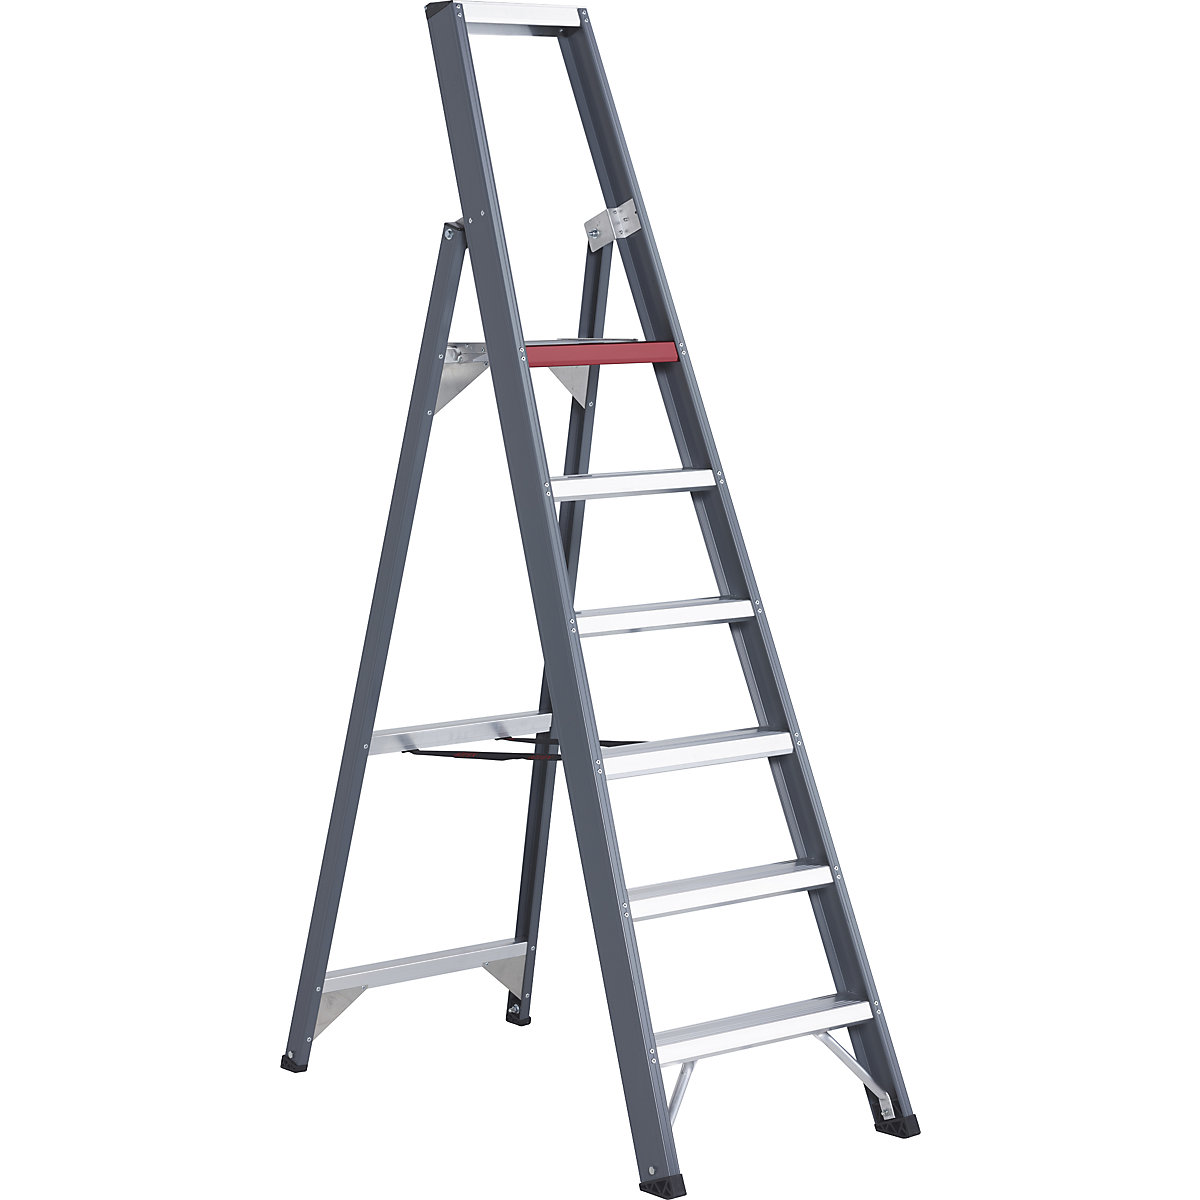 Aluminium step ladder, single sided access – Altrex, with storage tray, 6 steps, working height 3400 mm-5